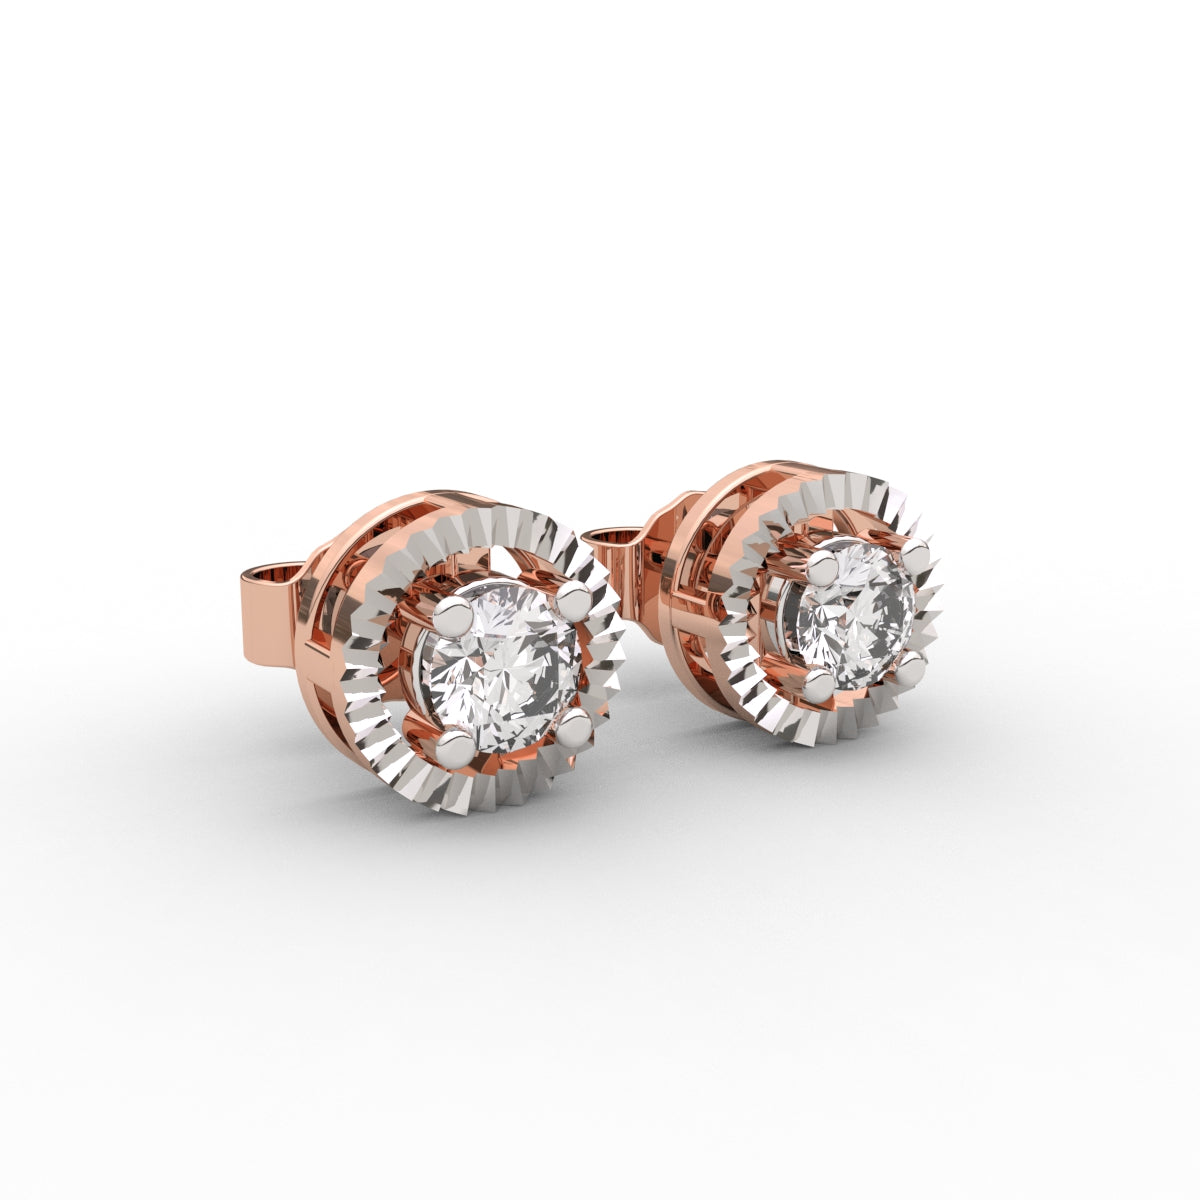 Charming Round Two-Tone Studs